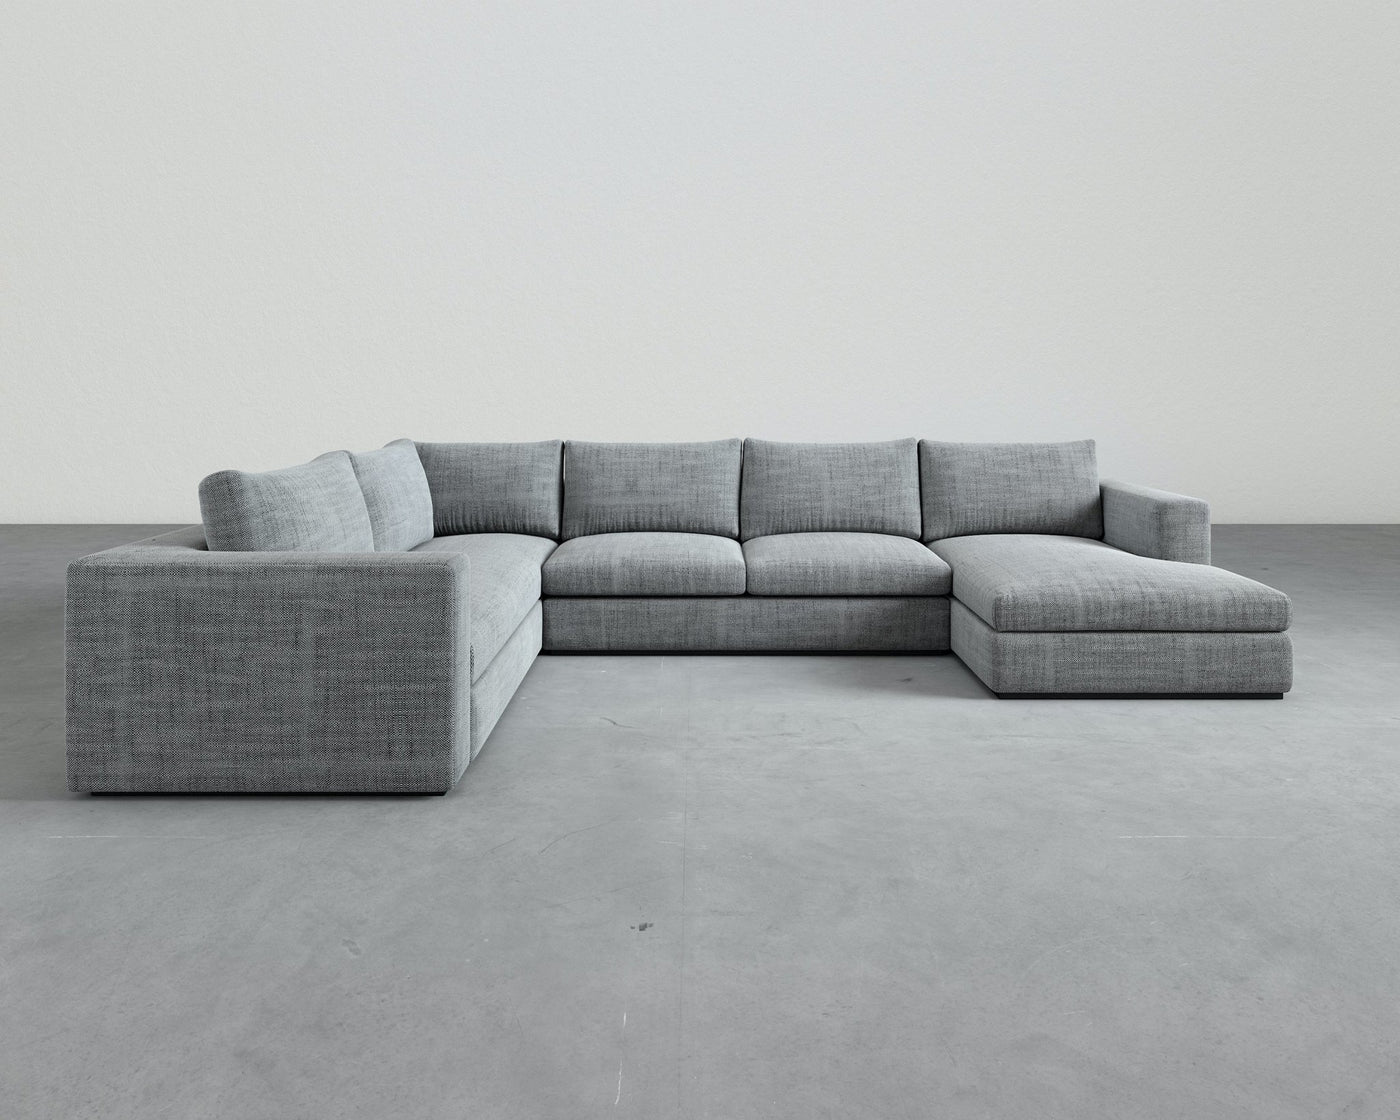 Tuxxy Sectional 156" - Sectional